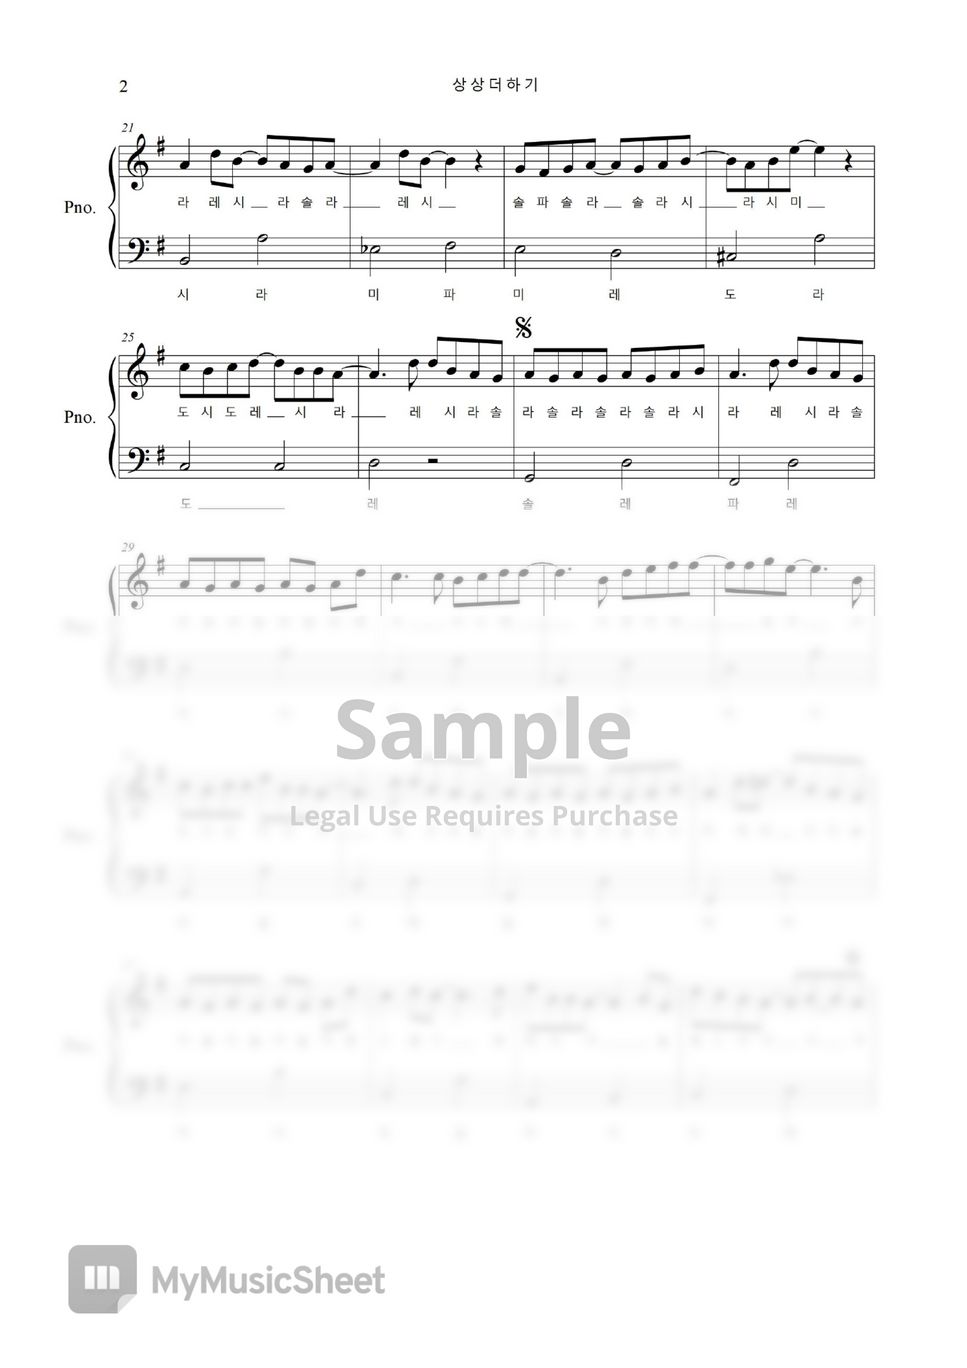 MSG워너비 - 상상더하기 (very easy) Sheets by freestyle pianoman